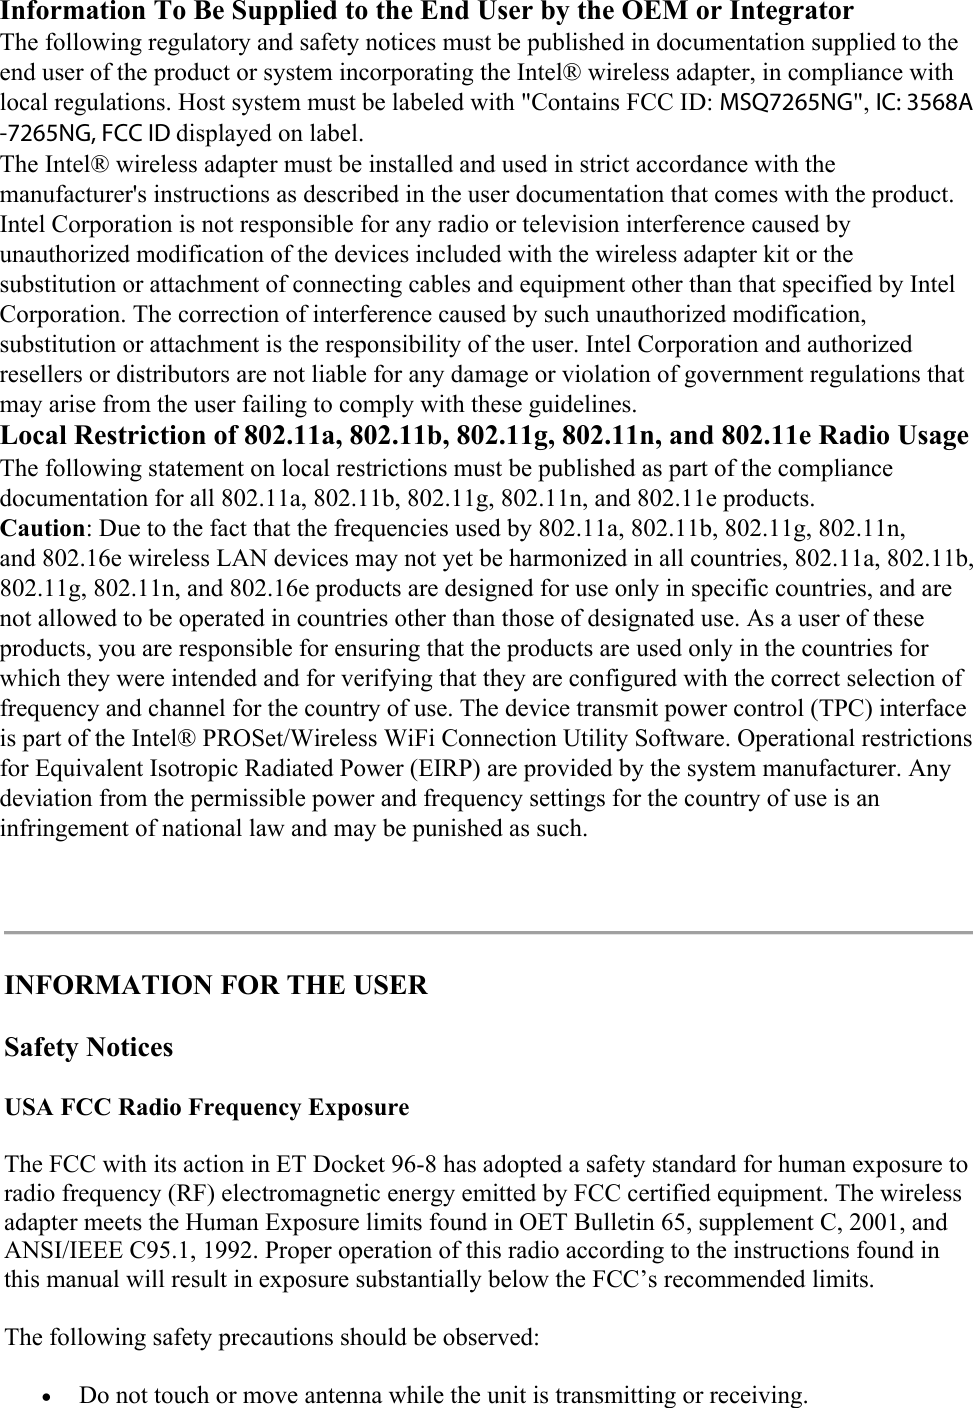   INFORMATION FOR THE USER Safety Notices USA FCC Radio Frequency Exposure The FCC with its action in ET Docket 96-8 has adopted a safety standard for human exposure to radio frequency (RF) electromagnetic energy emitted by FCC certified equipment. The wireless adapter meets the Human Exposure limits found in OET Bulletin 65, supplement C, 2001, and ANSI/IEEE C95.1, 1992. Proper operation of this radio according to the instructions found in this manual will result in exposure substantially below the FCC’s recommended limits. The following safety precautions should be observed:  Do not touch or move antenna while the unit is transmitting or receiving.  Information To Be Supplied to the End User by the OEM or Integrator The following regulatory and safety notices must be published in documentation supplied to the end user of the product or system incorporating the Intel® wireless adapter, in compliance with local regulations. Host system must be labeled with &quot;Contains FCC ID: MSQ7265NG&quot;, IC: 3568A -7265NG, FCC ID displayed on label. The Intel® wireless adapter must be installed and used in strict accordance with the manufacturer&apos;s instructions as described in the user documentation that comes with the product. Intel Corporation is not responsible for any radio or television interference caused by unauthorized modification of the devices included with the wireless adapter kit or the substitution or attachment of connecting cables and equipment other than that specified by Intel Corporation. The correction of interference caused by such unauthorized modification, substitution or attachment is the responsibility of the user. Intel Corporation and authorized resellers or distributors are not liable for any damage or violation of government regulations that may arise from the user failing to comply with these guidelines. Local Restriction of 802.11a, 802.11b, 802.11g, 802.11n, and 802.11e Radio Usage The following statement on local restrictions must be published as part of the compliance documentation for all 802.11a, 802.11b, 802.11g, 802.11n, and 802.11e products. Caution: Due to the fact that the frequencies used by 802.11a, 802.11b, 802.11g, 802.11n, and 802.16e wireless LAN devices may not yet be harmonized in all countries, 802.11a, 802.11b, 802.11g, 802.11n, and 802.16e products are designed for use only in specific countries, and are not allowed to be operated in countries other than those of designated use. As a user of these products, you are responsible for ensuring that the products are used only in the countries for which they were intended and for verifying that they are configured with the correct selection of frequency and channel for the country of use. The device transmit power control (TPC) interface is part of the Intel® PROSet/Wireless WiFi Connection Utility Software. Operational restrictions for Equivalent Isotropic Radiated Power (EIRP) are provided by the system manufacturer. Any deviation from the permissible power and frequency settings for the country of use is an infringement of national law and may be punished as such. 